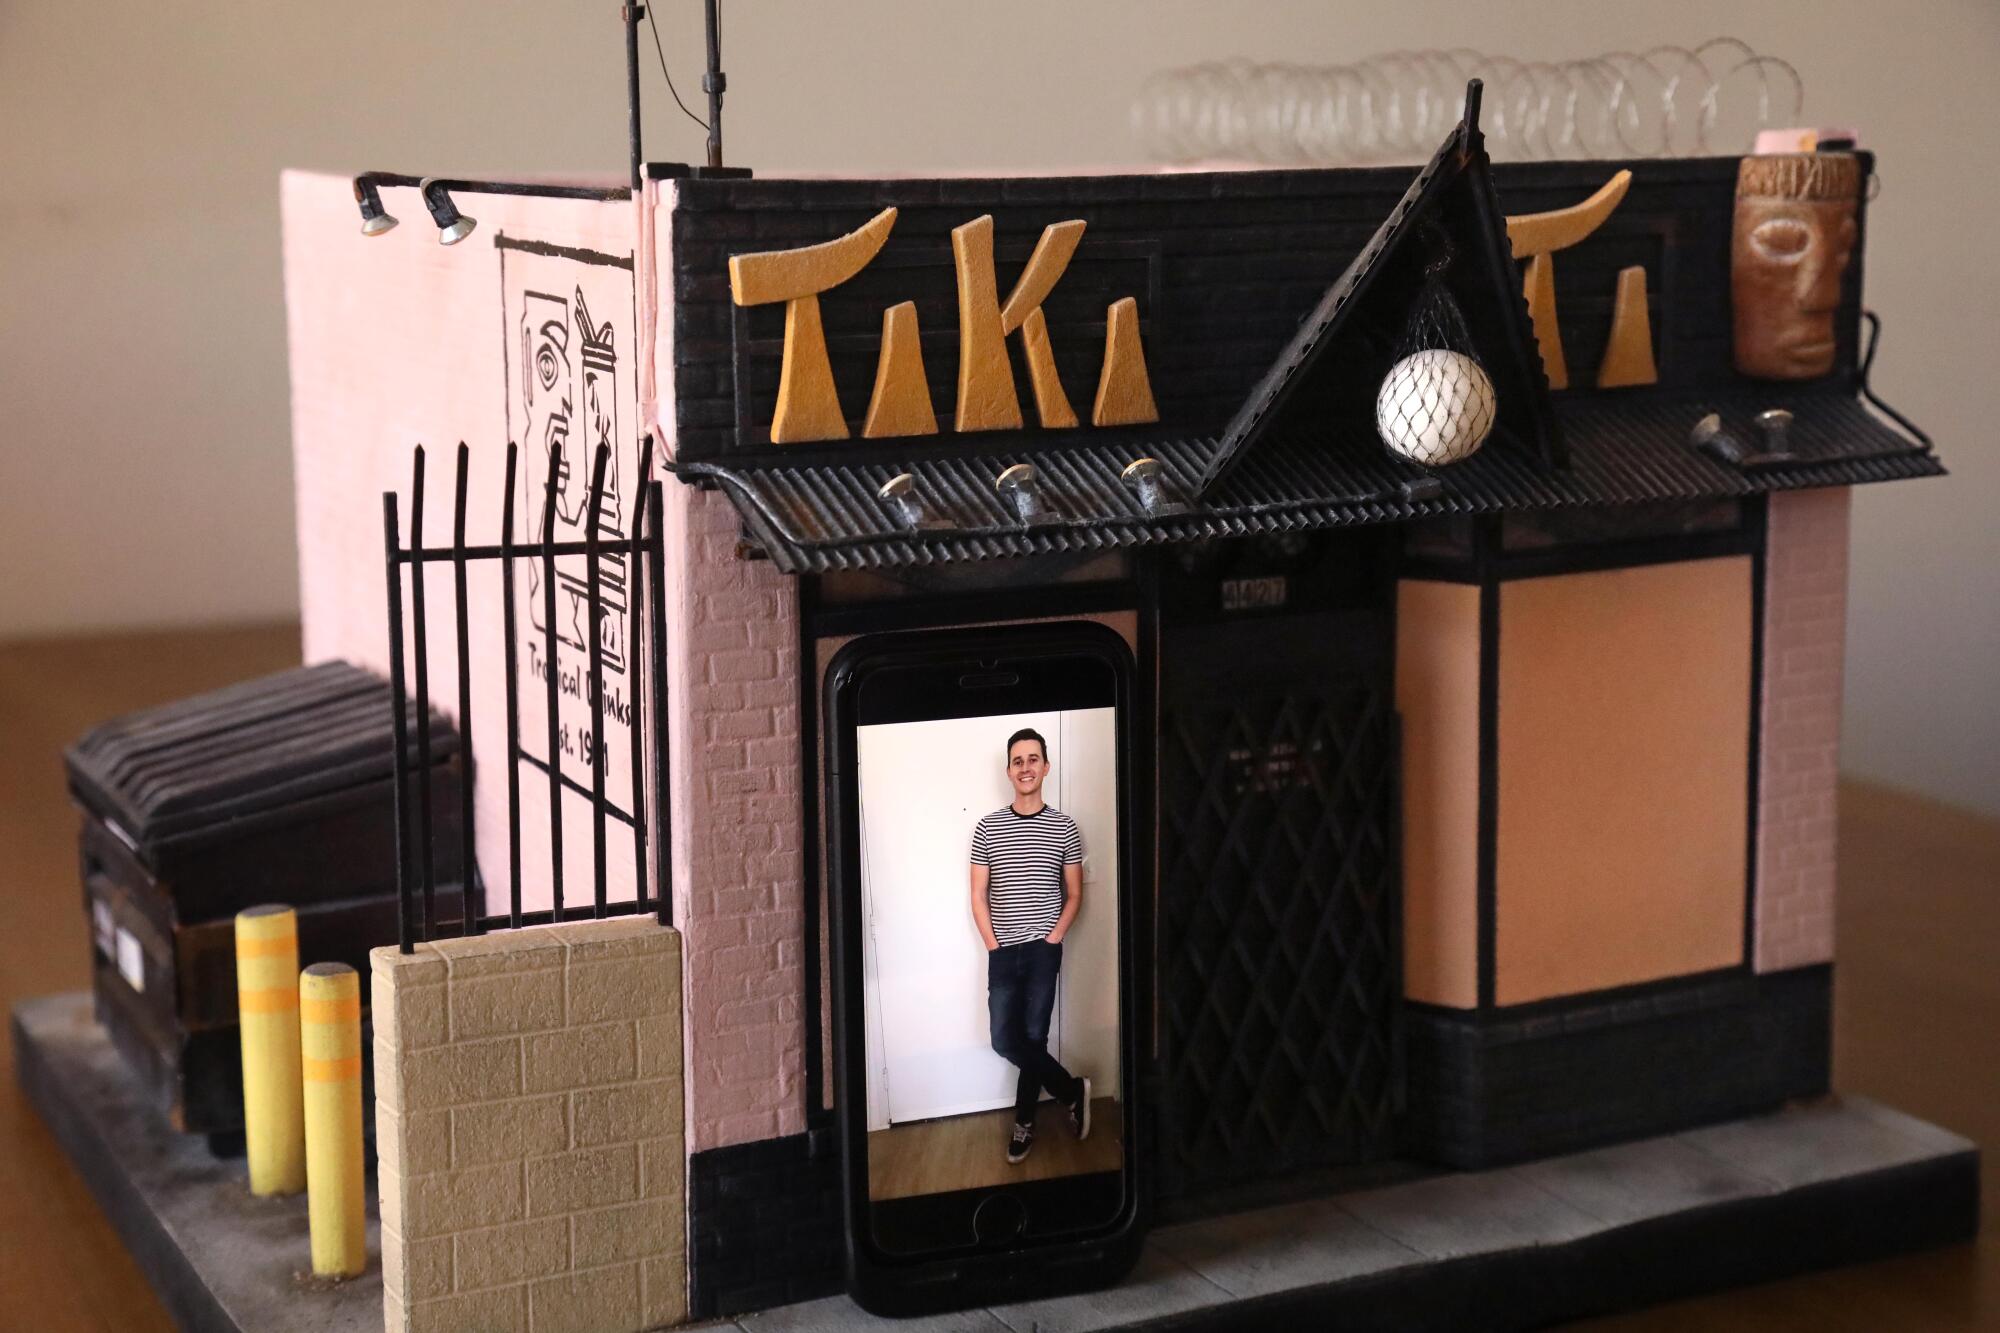  Kieran Wright, in an iPhone photo, seems to be in scale with his miniature creation of the Tiki-Ti bar.